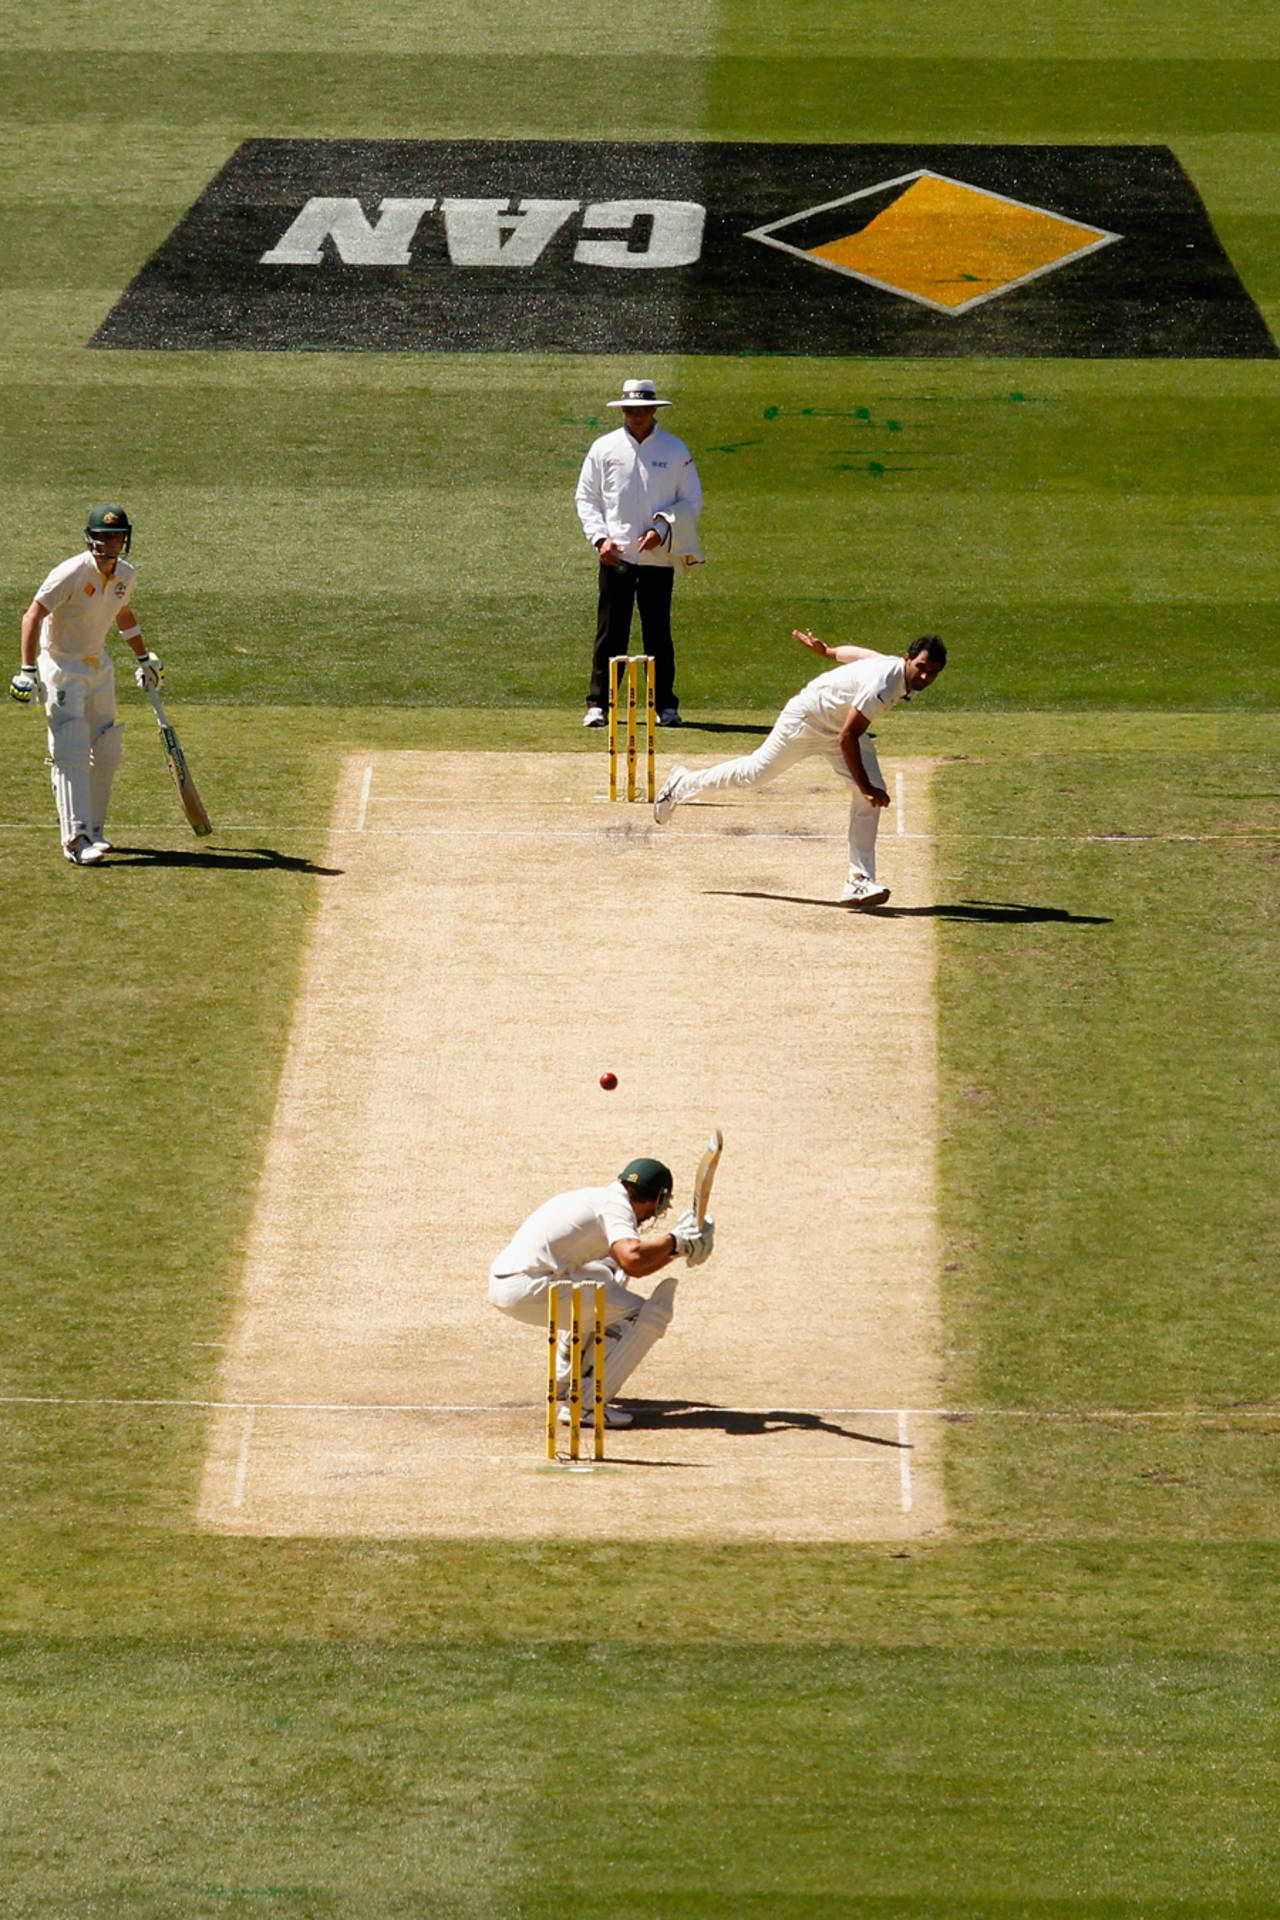 The bouncer gives the bowler a way to test a batsman that no other delivery does&nbsp;&nbsp;&bull;&nbsp;&nbsp;Getty Images